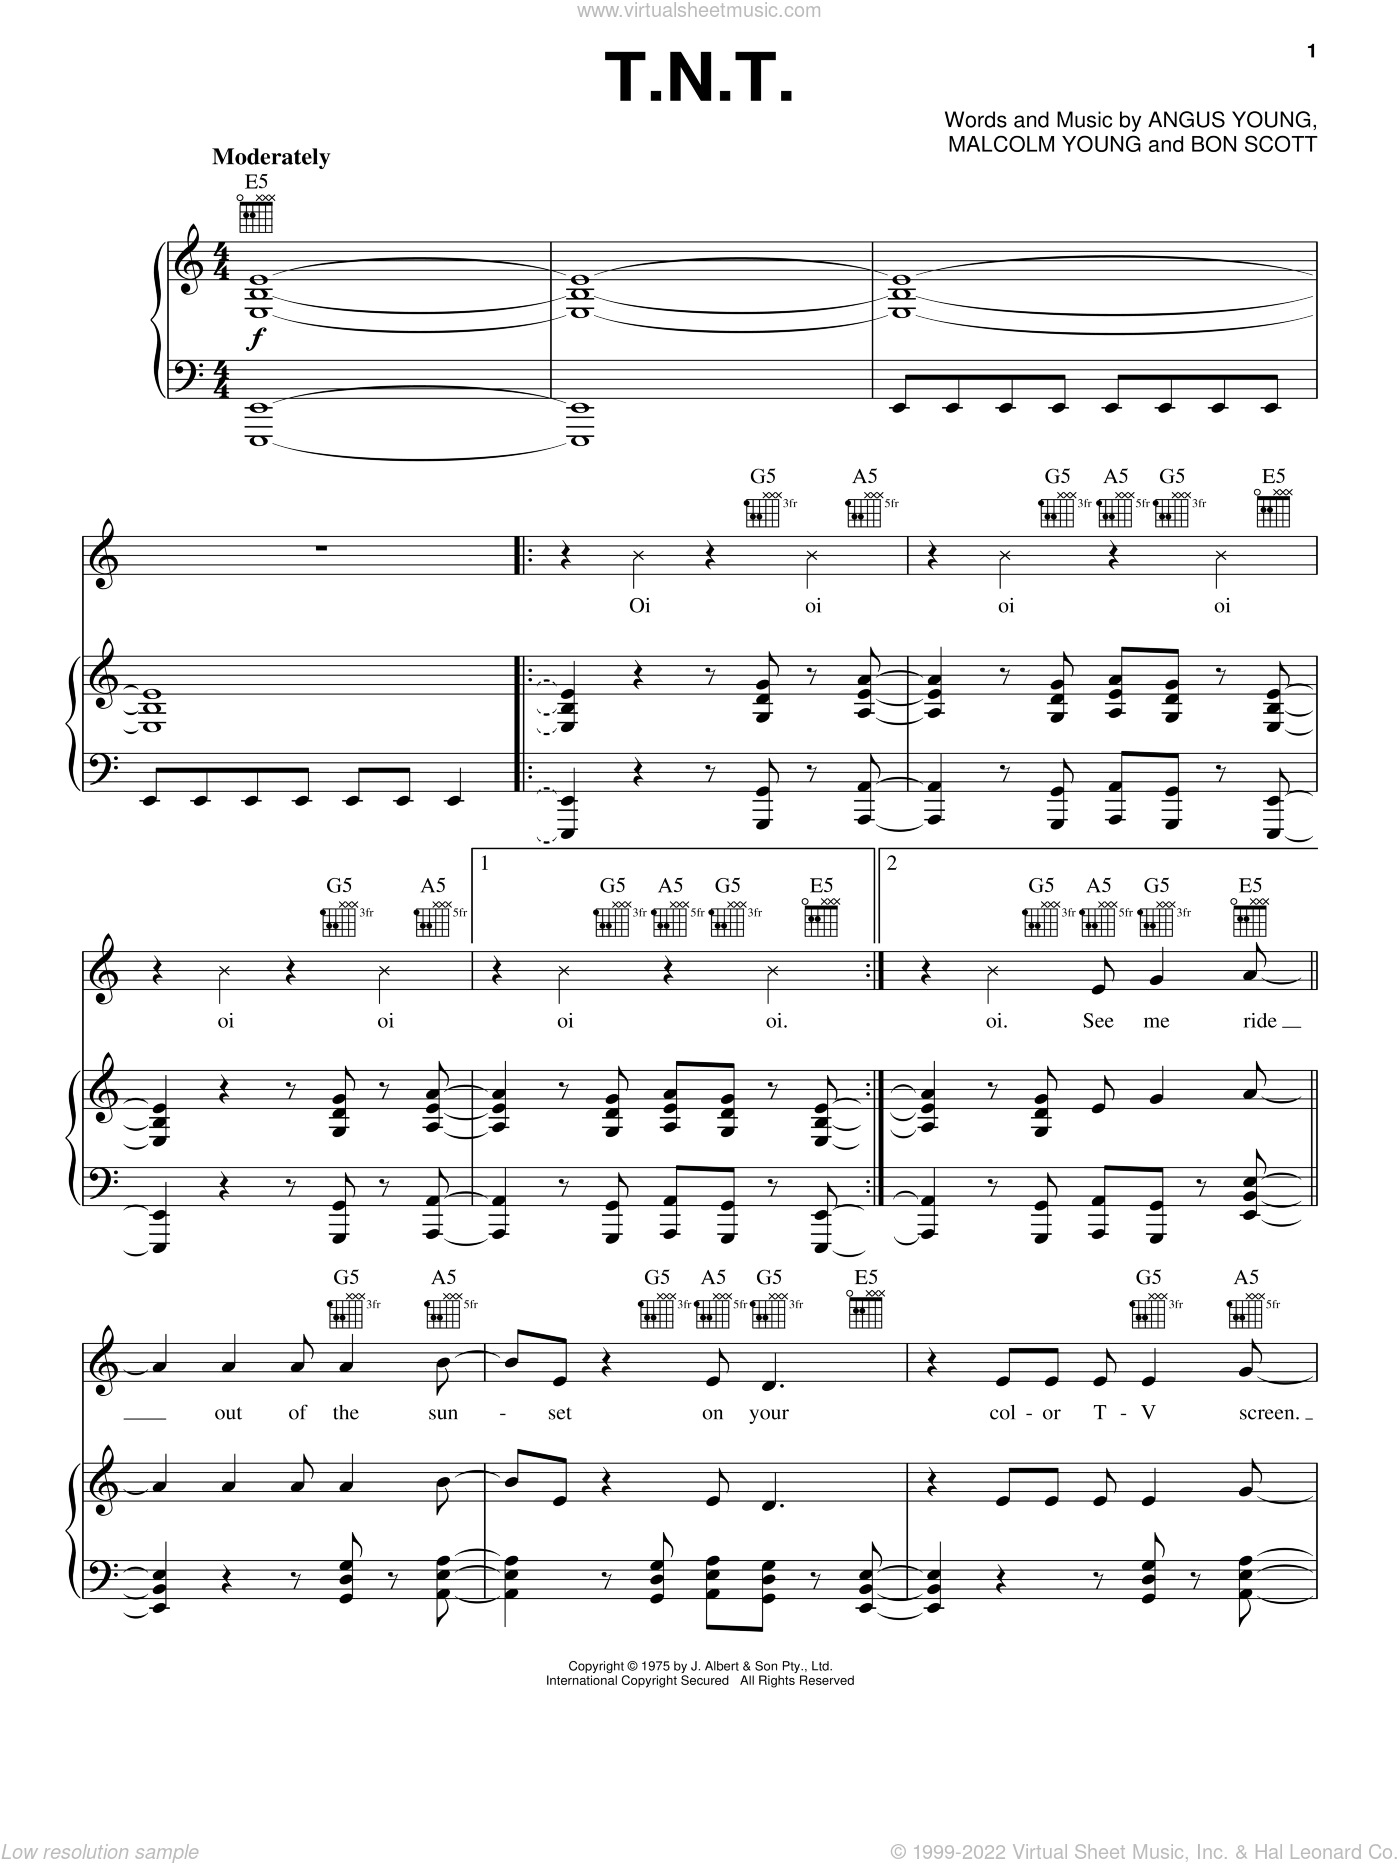 Ac Dc T N T Sheet Music For Voice Piano Or Guitar Pdf It was one of the first singles with bon scott on lead vocals. ac dc t n t sheet music for voice piano or guitar pdf